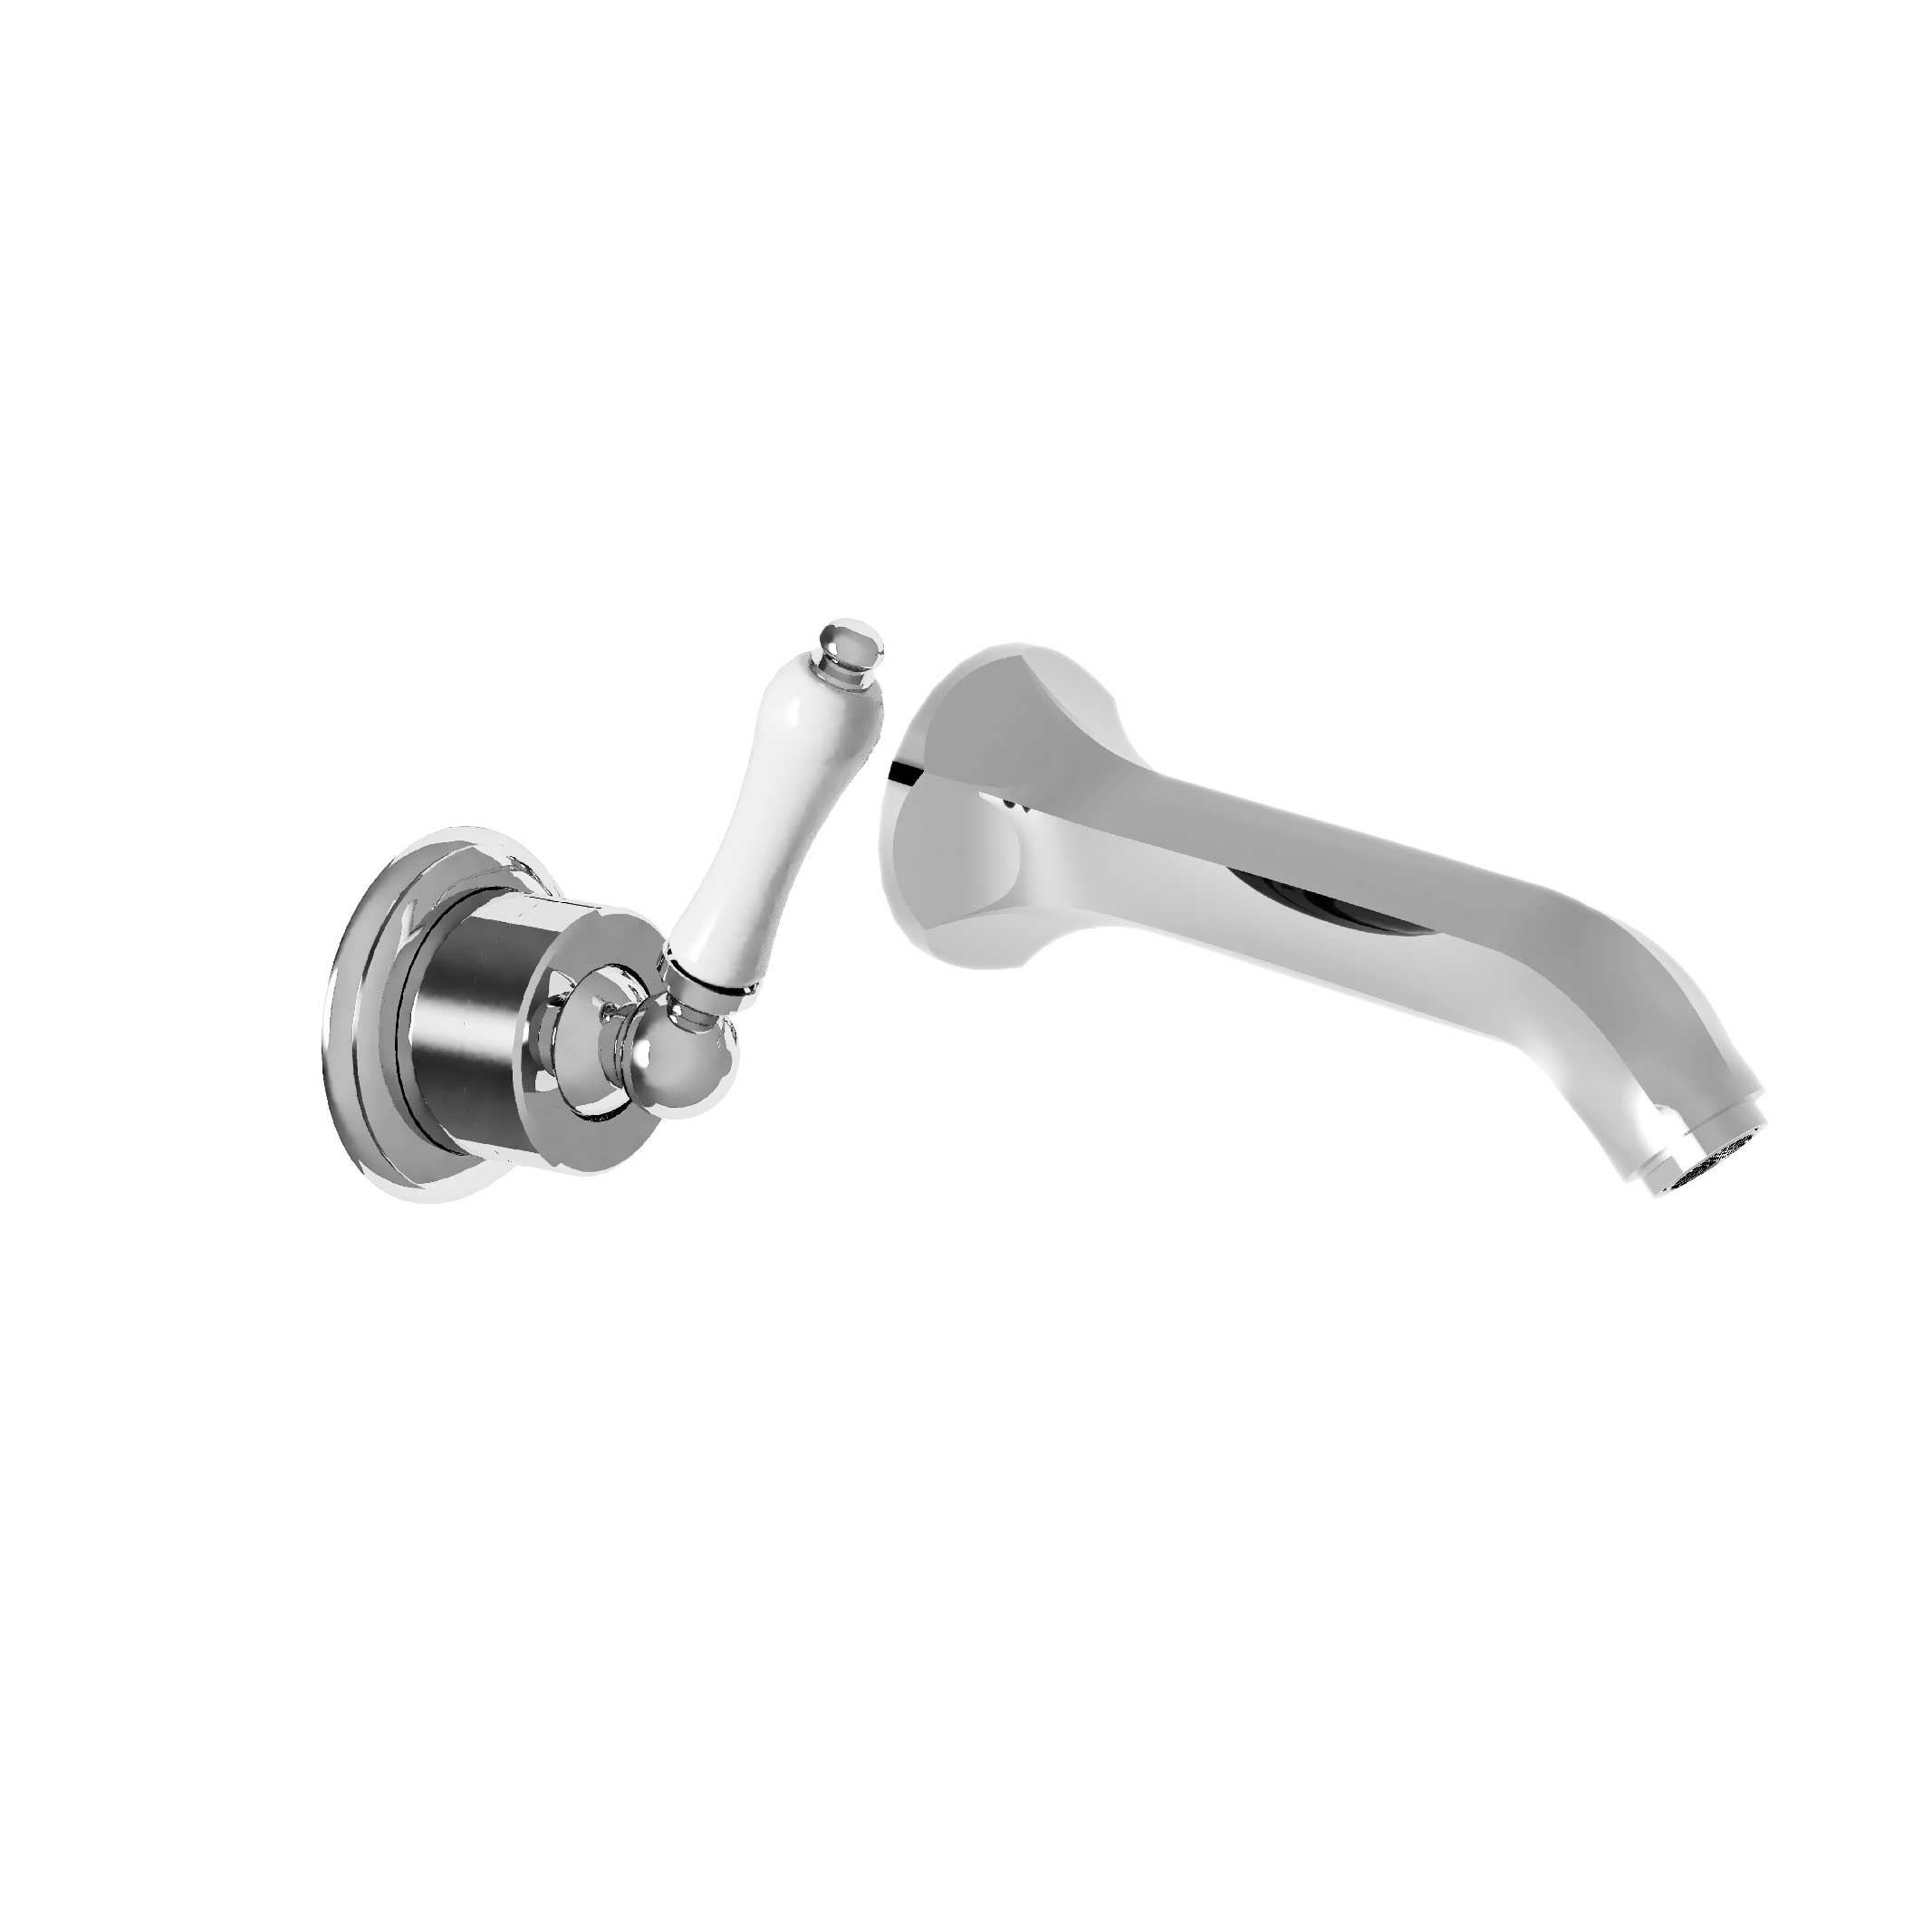 M32-1203M Wall mounted single lever basin mixer, built-in